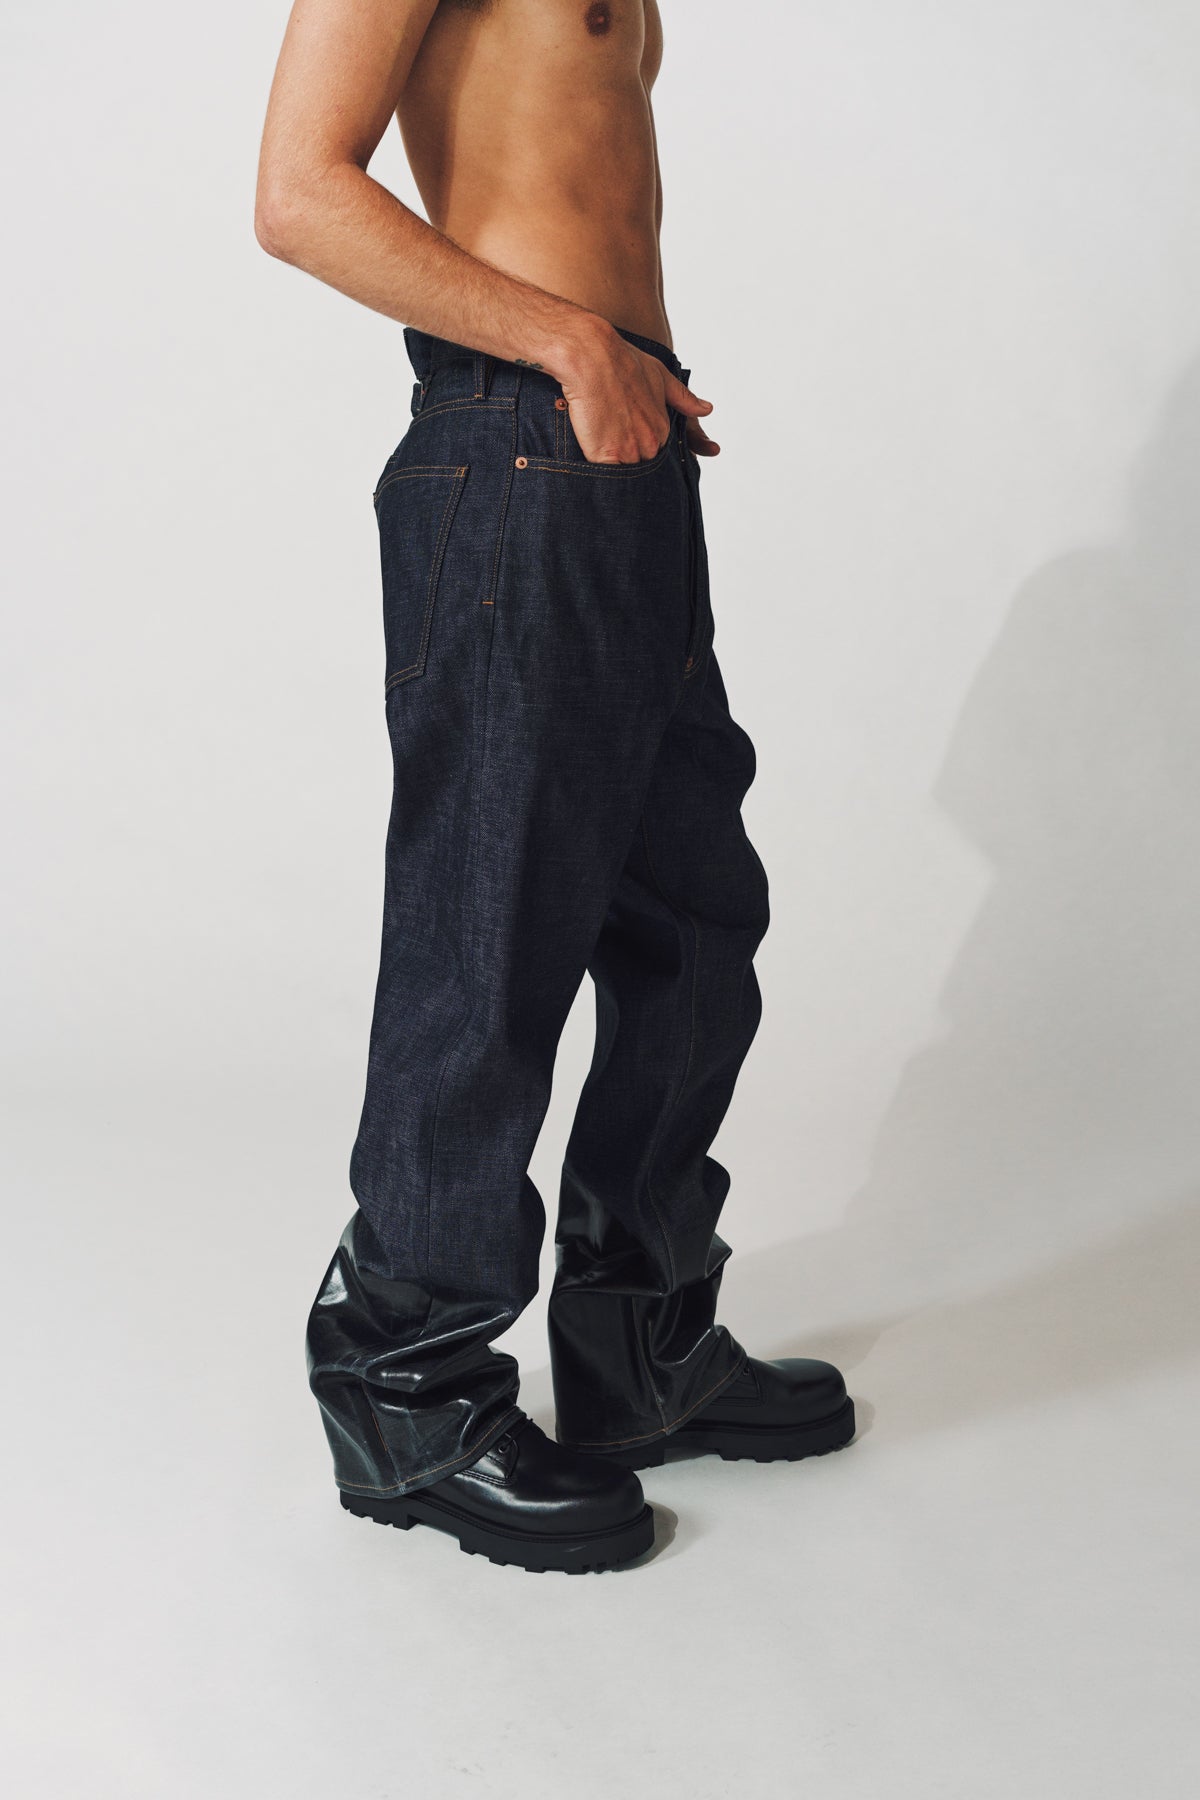 MAISON MARGIELA | LACQUERED TURN-UP JEANS